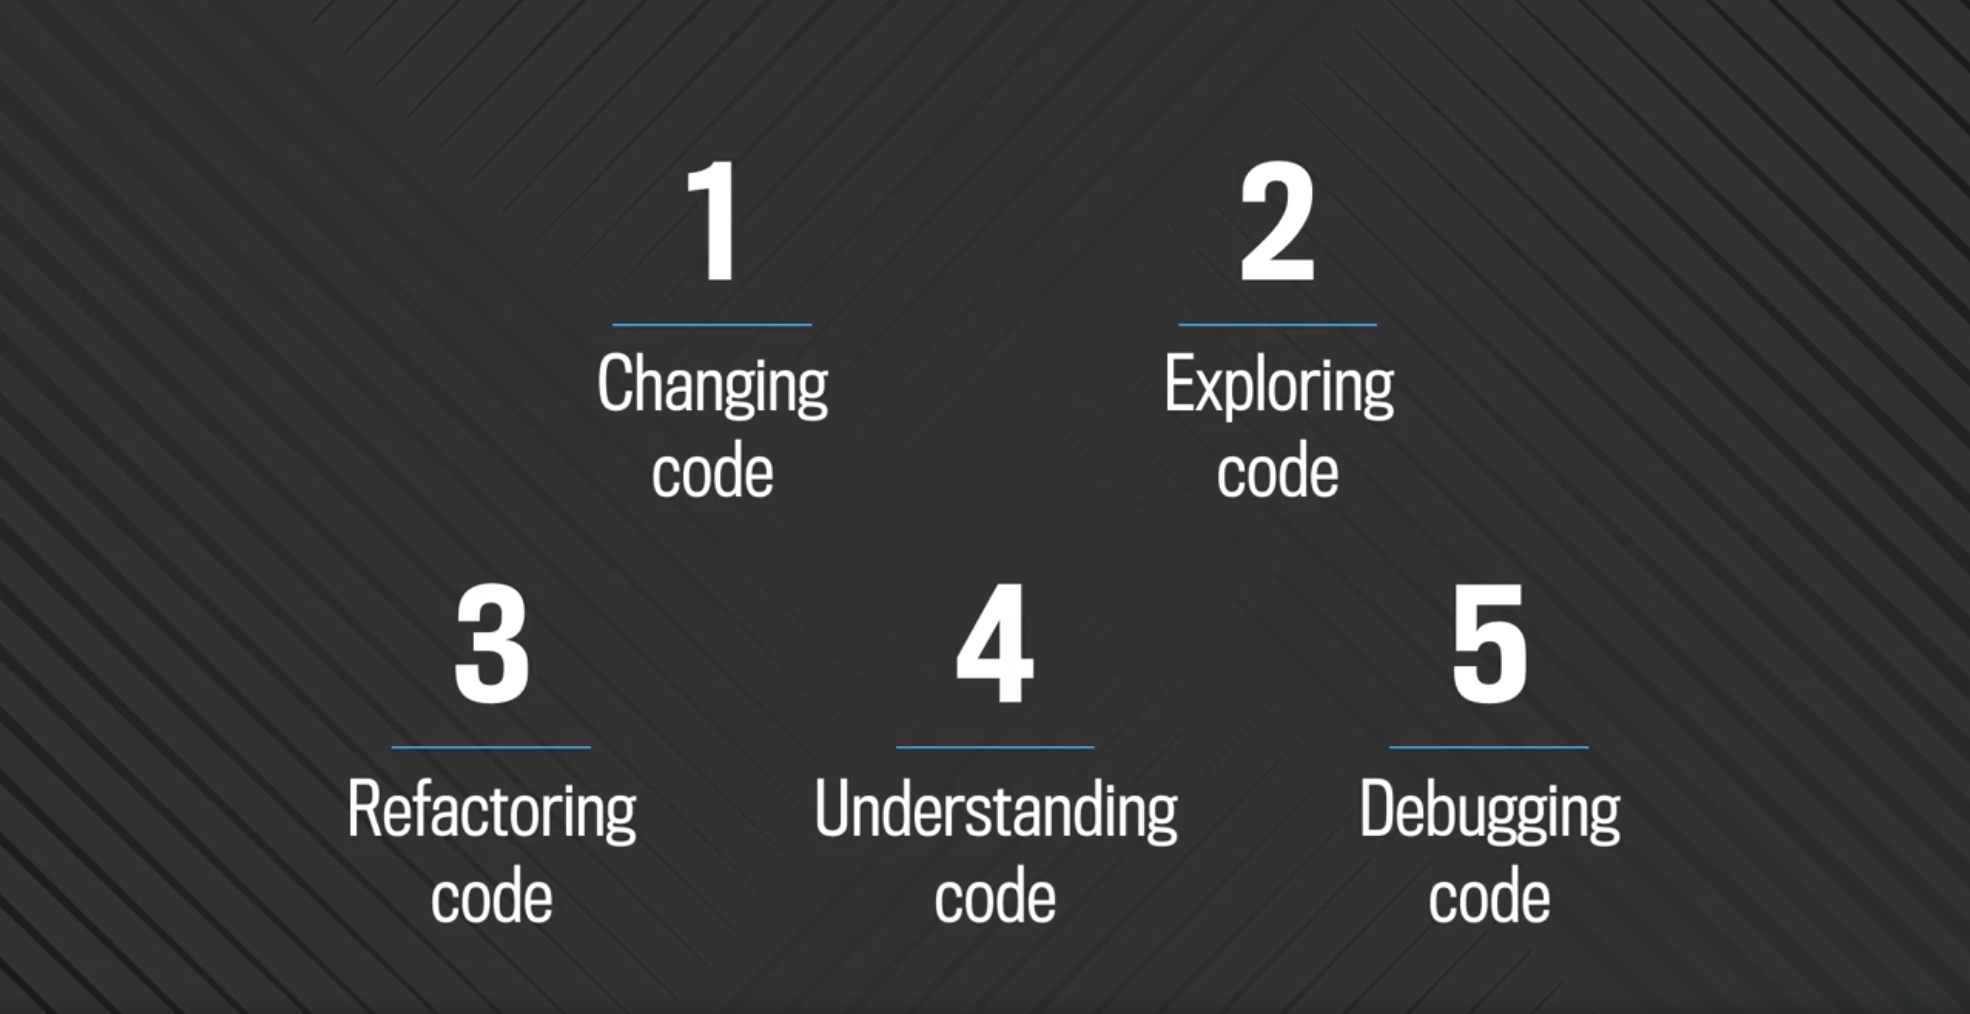 Facebook code search use cases: changing code, exploring code, refactoring code, understanding code, debugging code